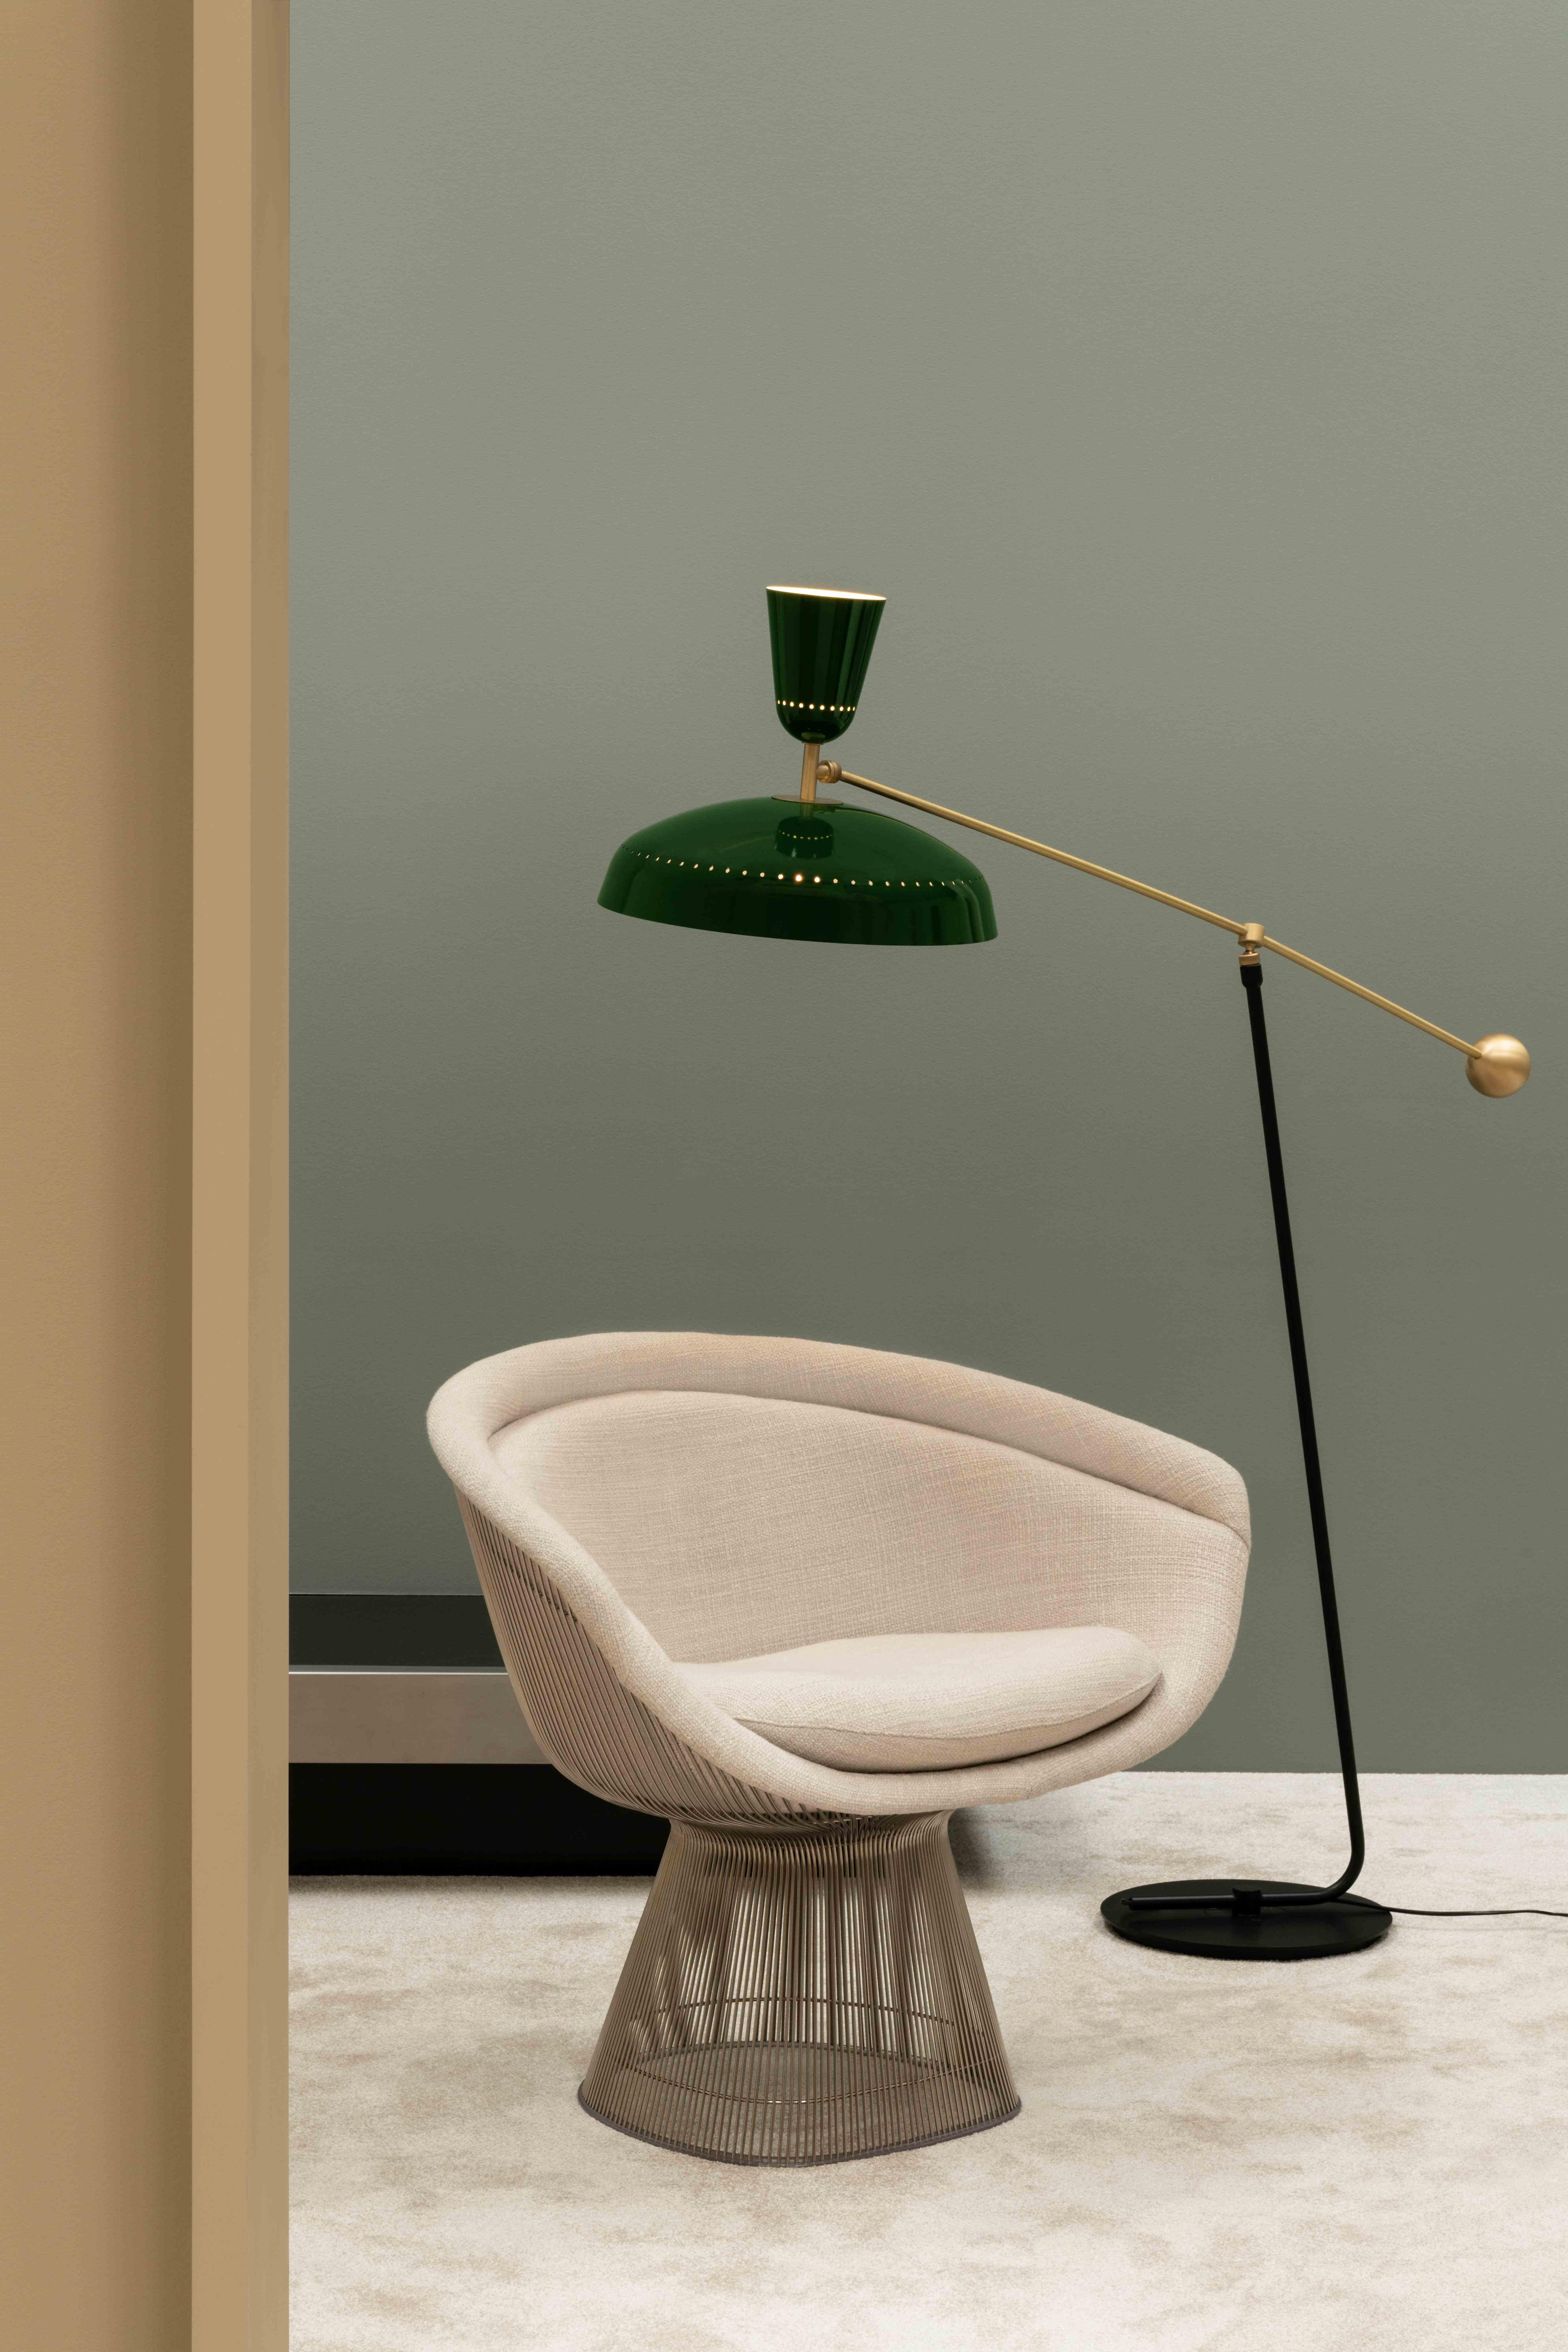 Large Pierre Guariche 'G1' floor lamp for Sammode Studio in green. 

Originally designed by Pierre Guariche in 1951, this iconic floor lamp is newly produced in an authorized re-edition by Sammode Studio in France embracing many of the same